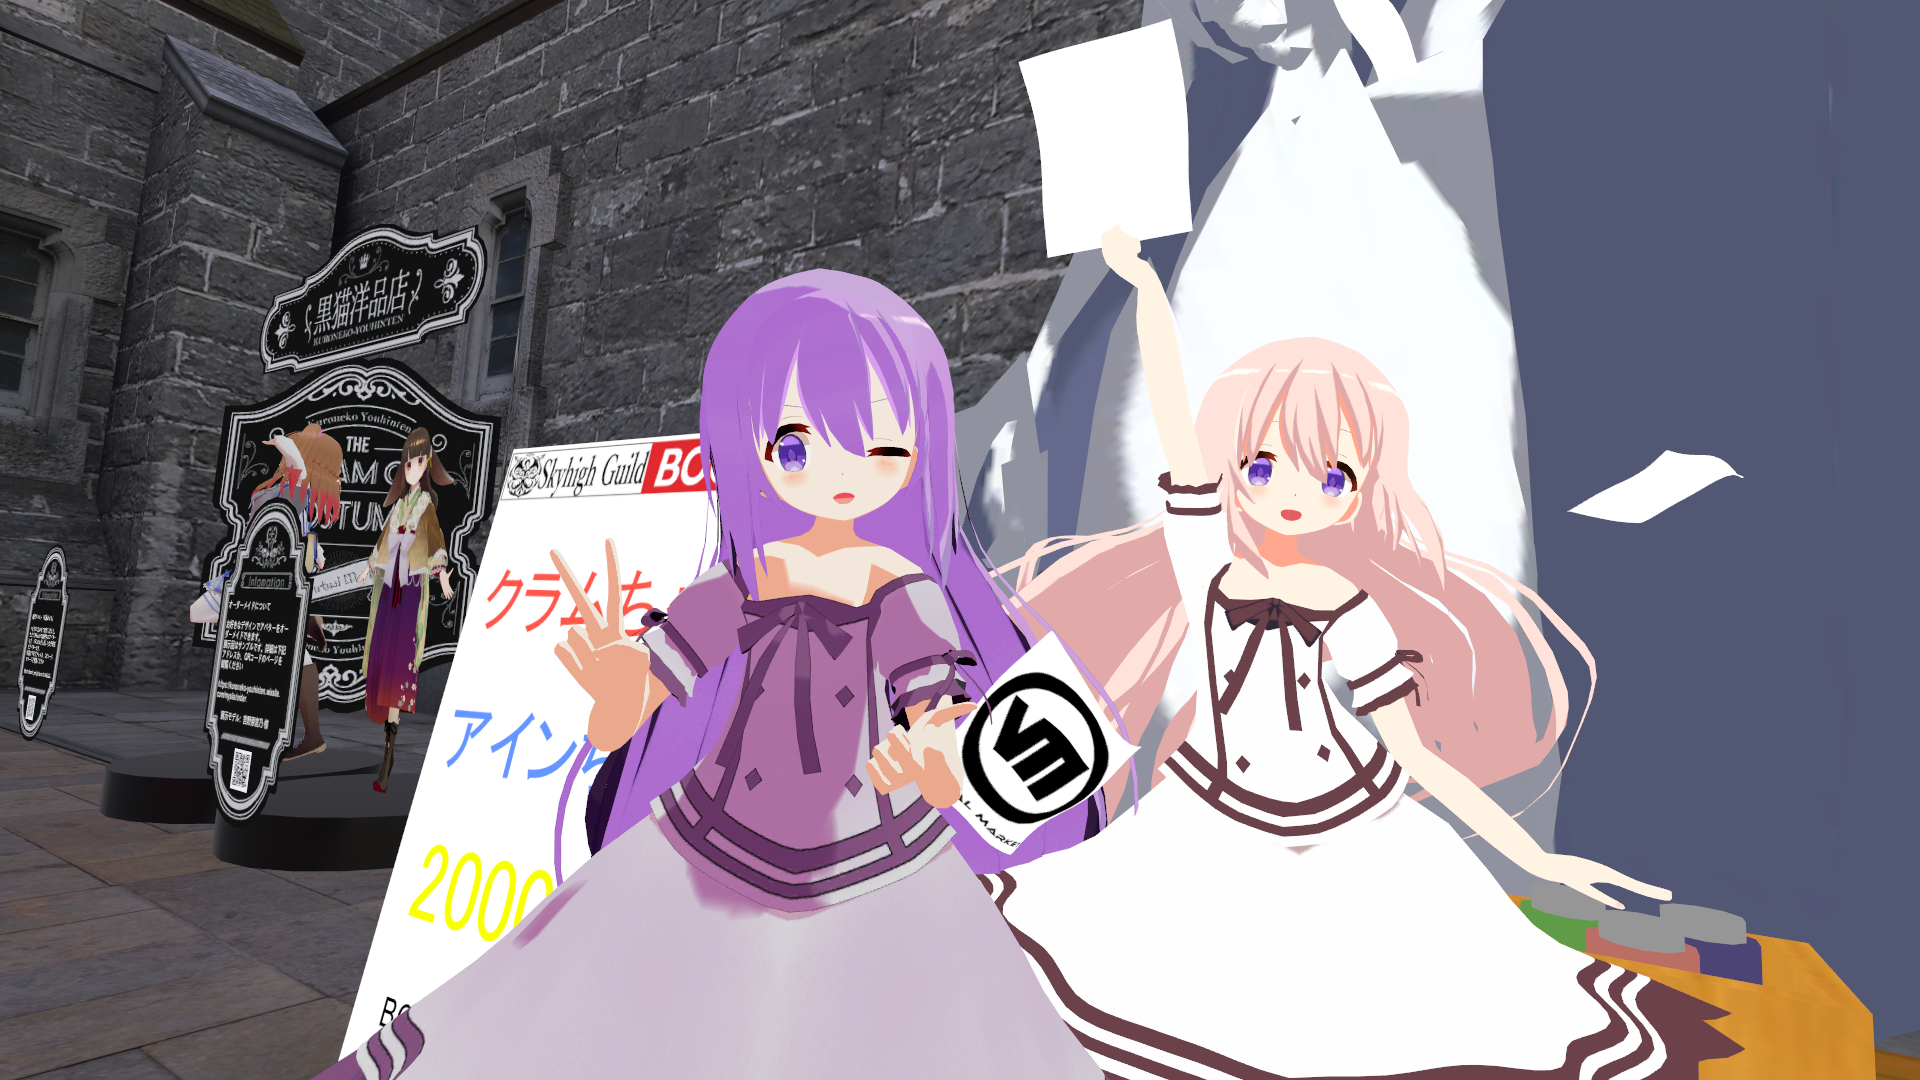 VRChat_1920x1080_2019-03-10_15-39-31.142.png